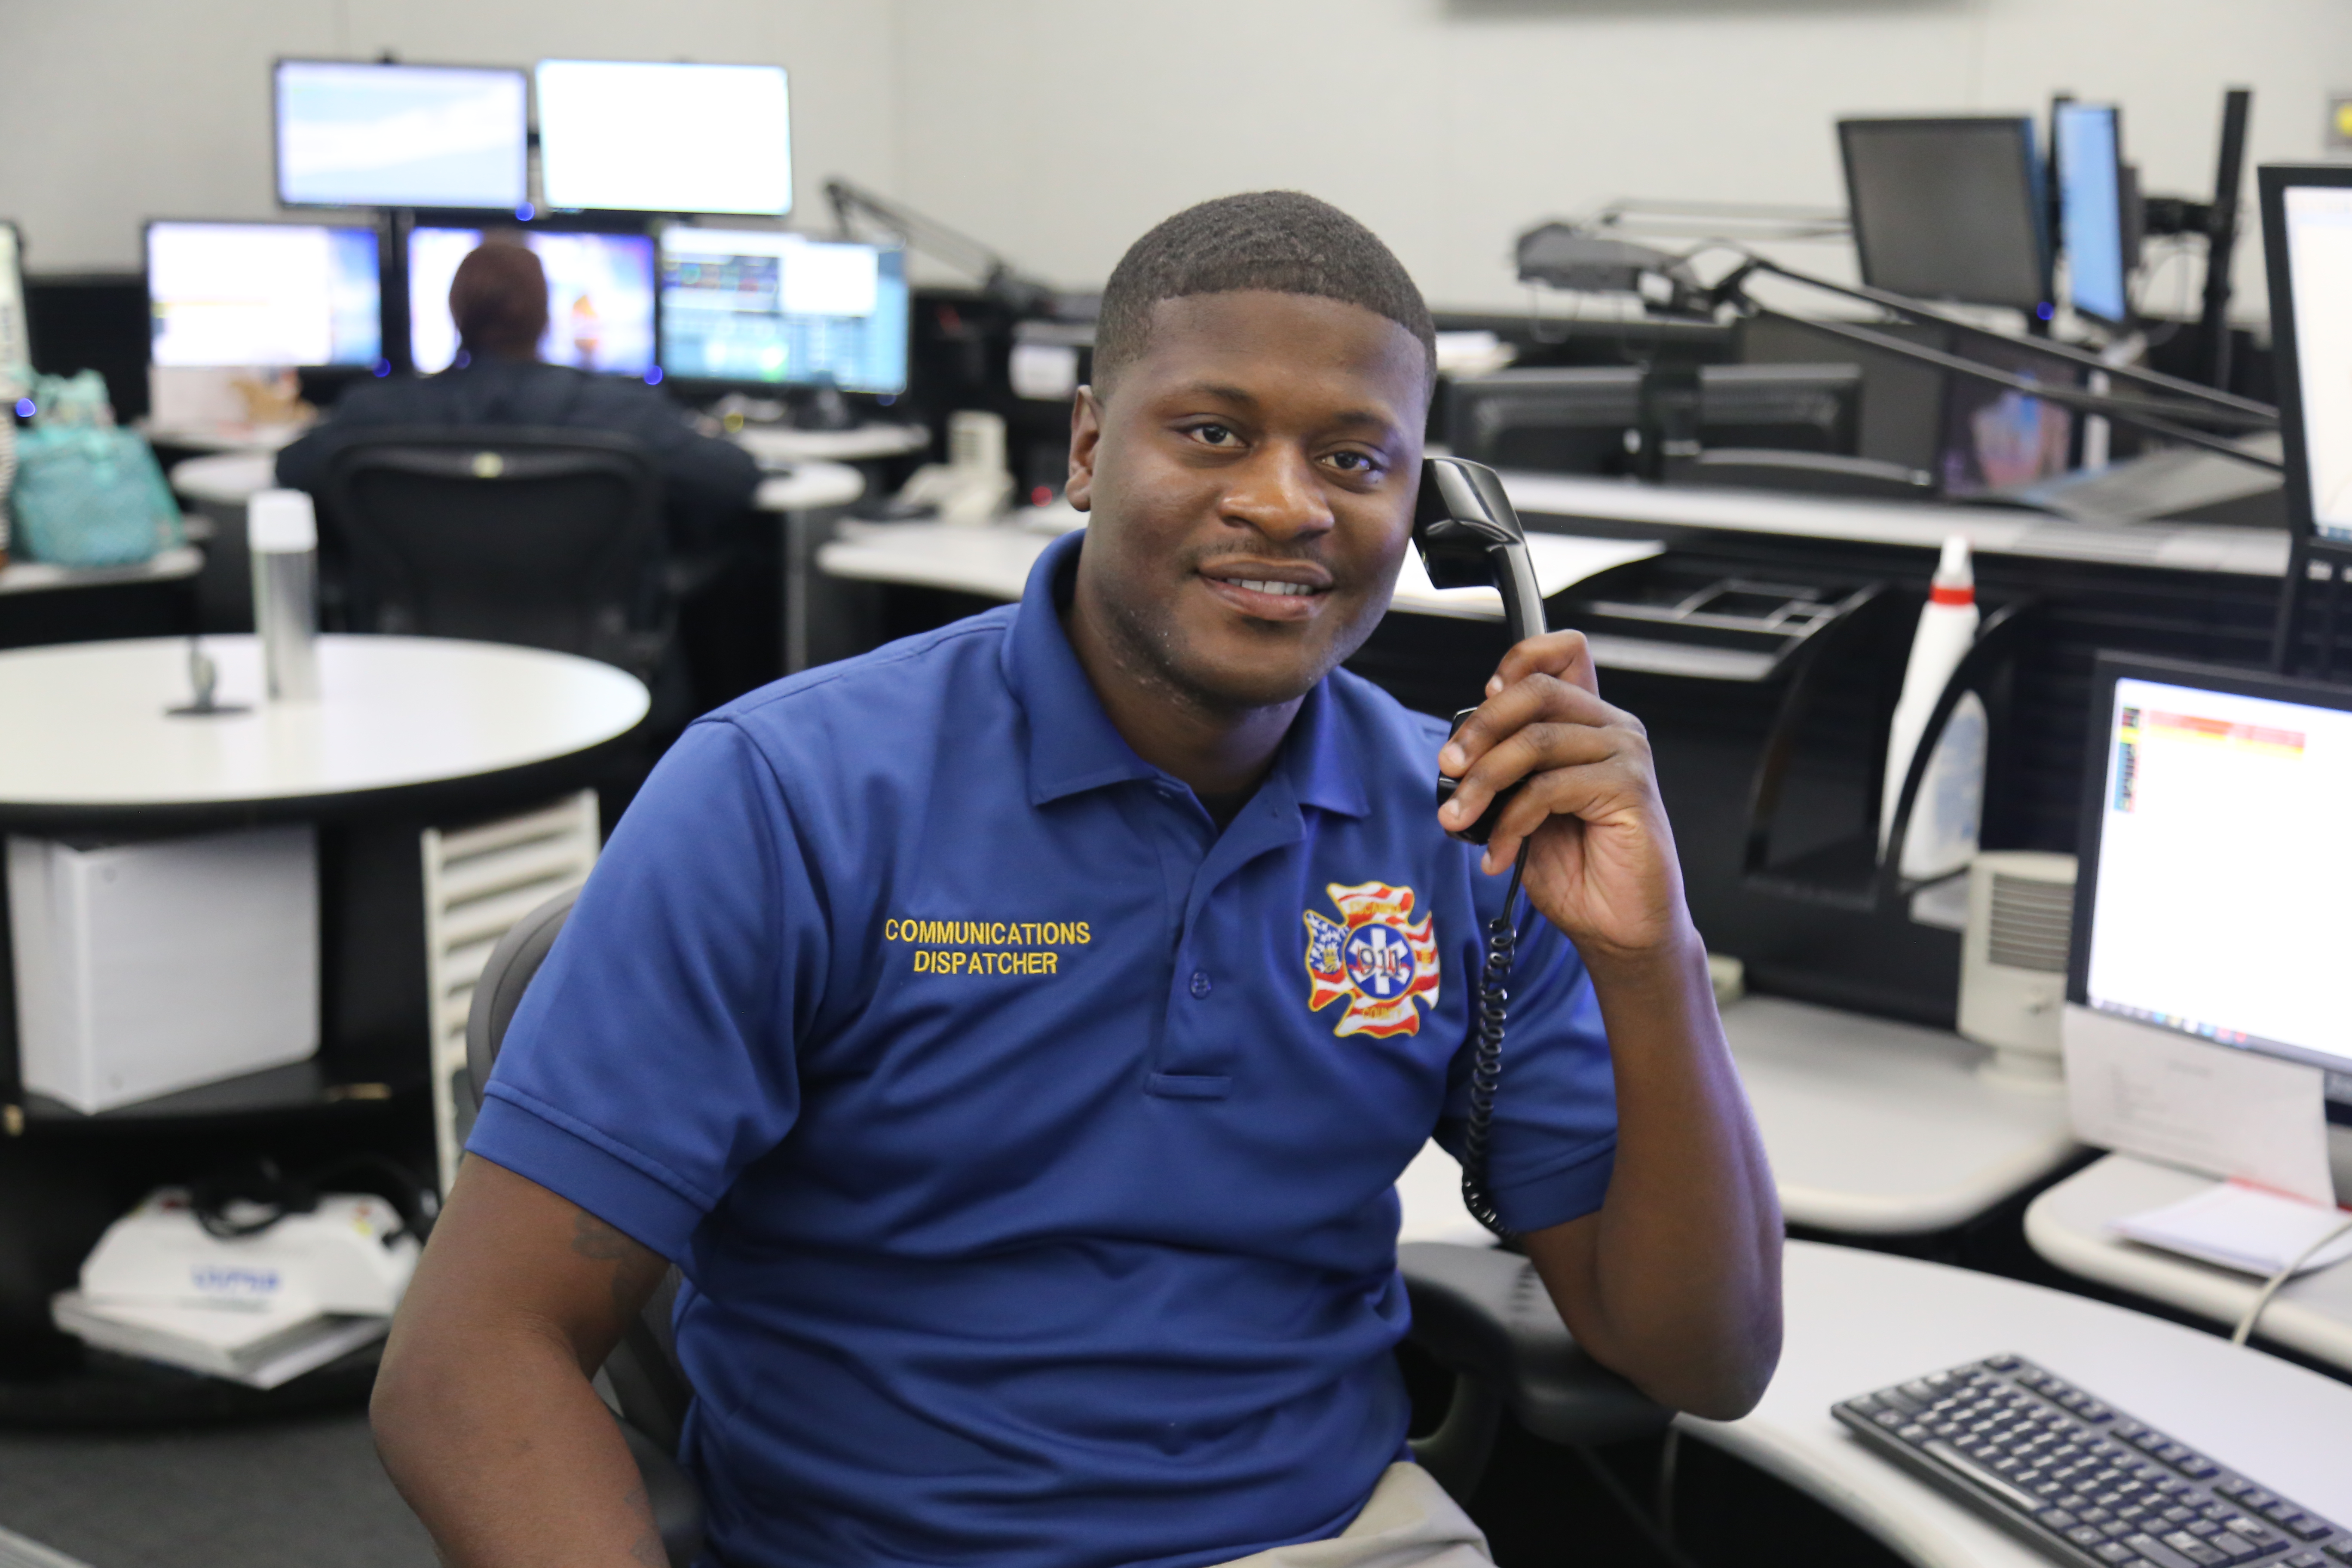 An Escambia County emergency dispatcher taking a call.